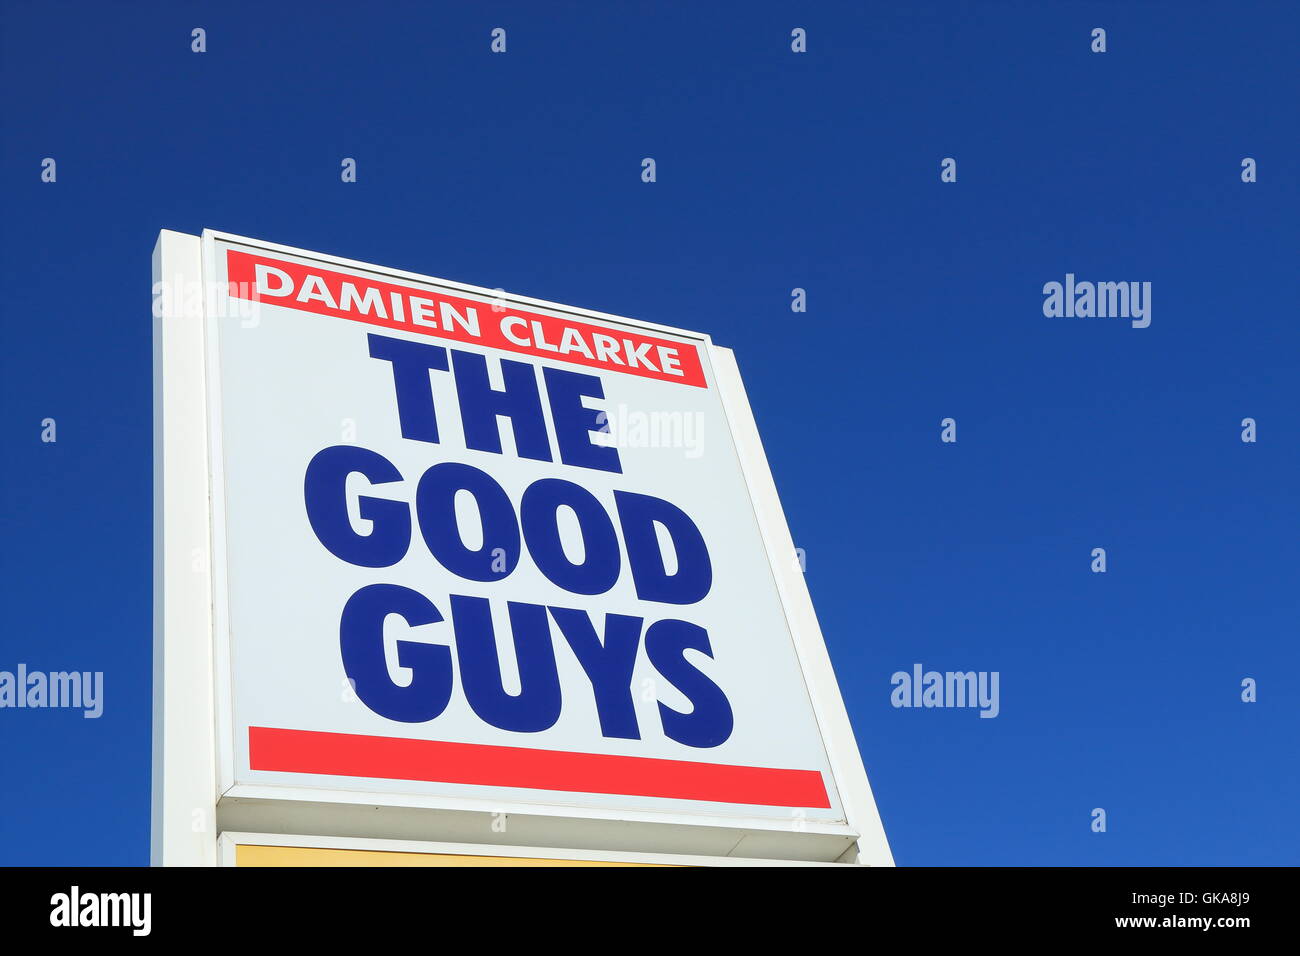 The Good Guys Australia, chain of consumer electronics retail stores in Australia and New Zealand founded in 1952. Stock Photo